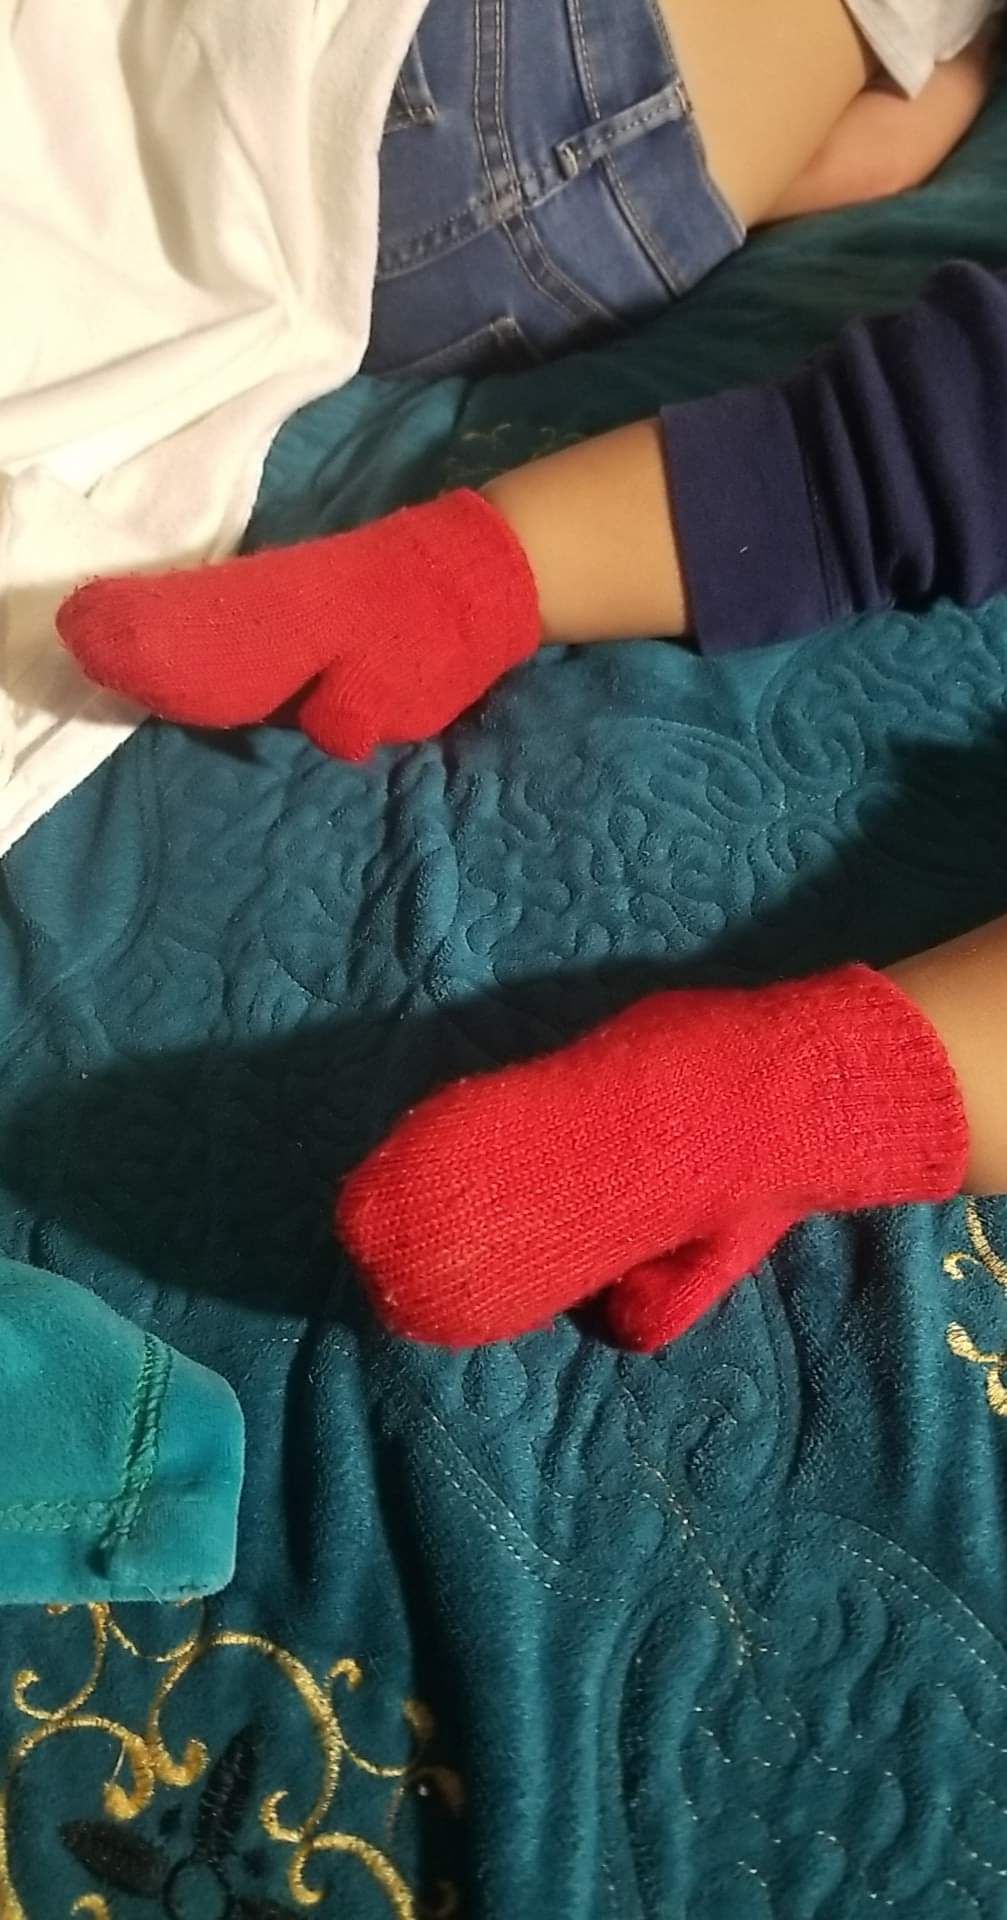 I thought I had put socks on my son this morning. Turns out they were gloves. My mother in law sent me this.